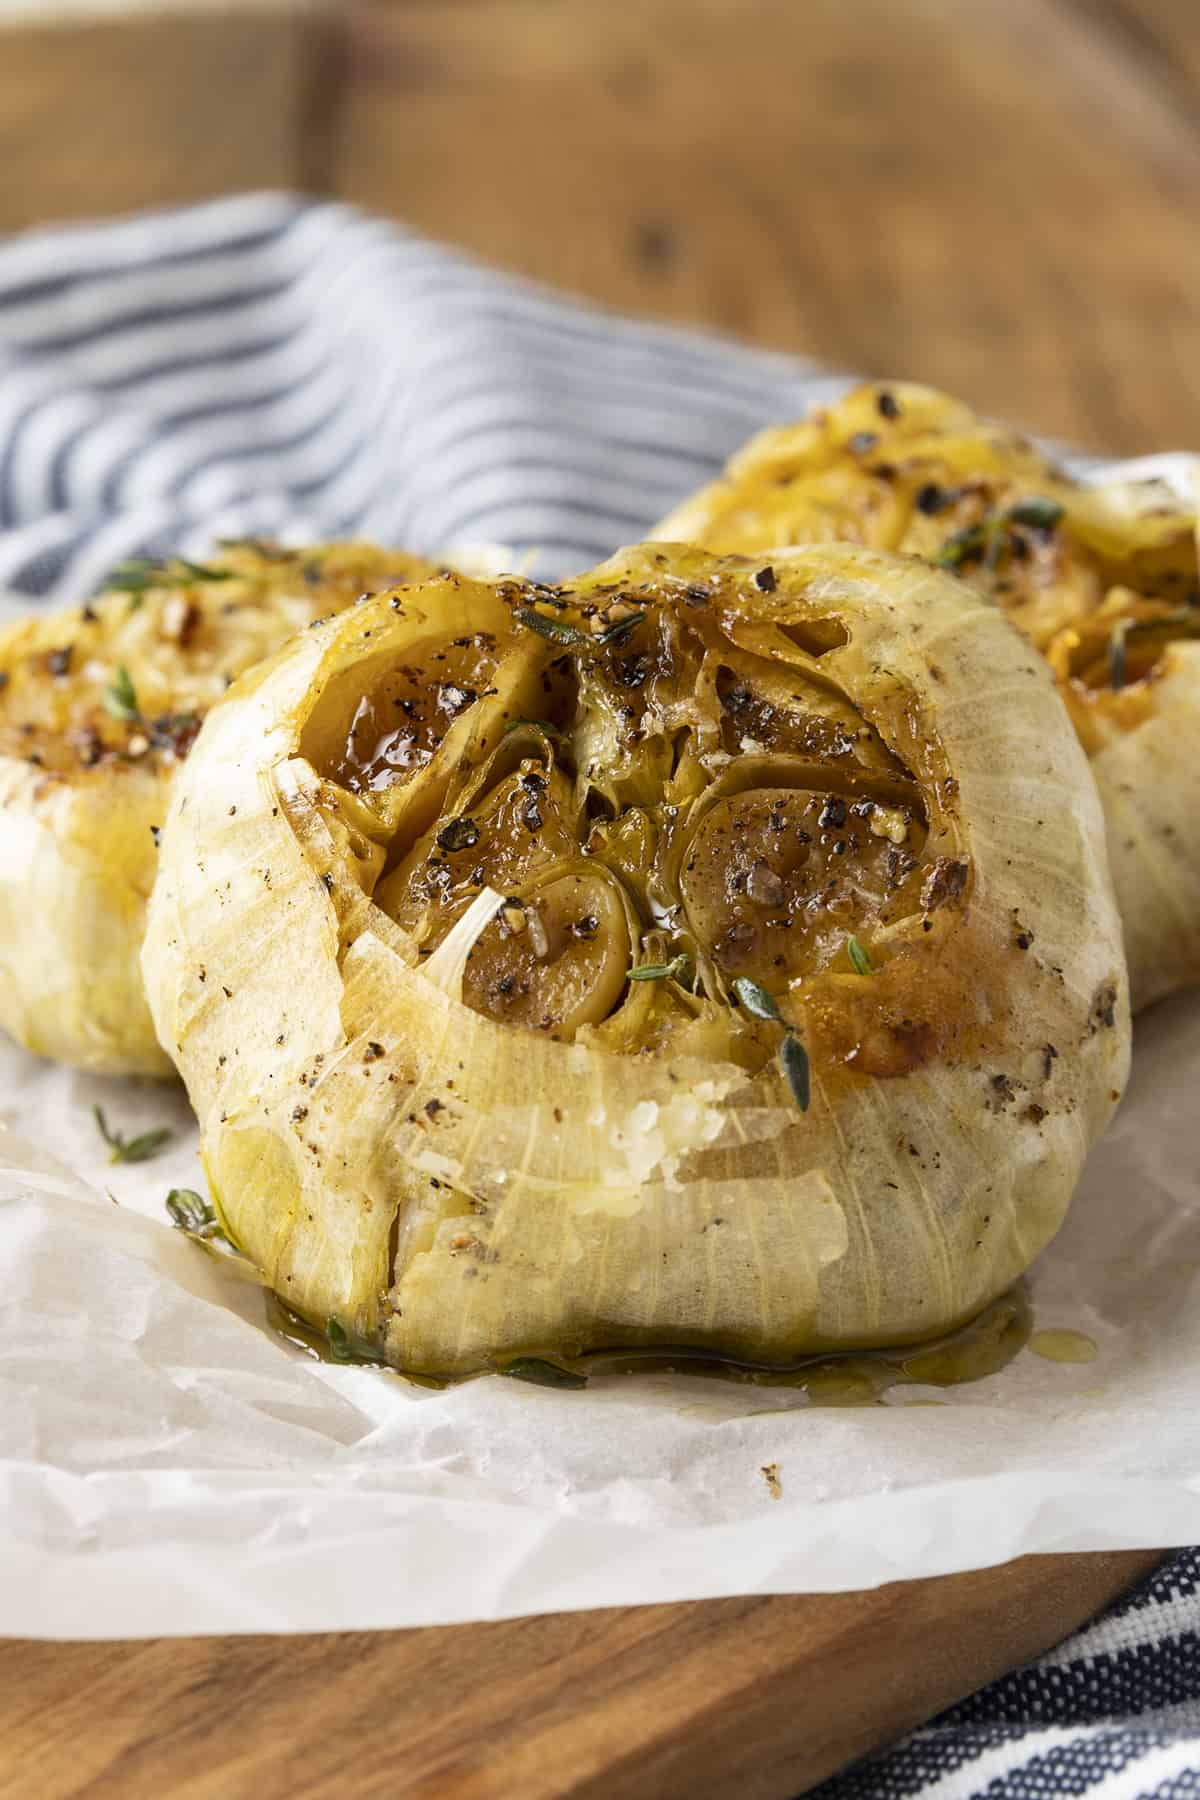 Tender, mellow, buttery roasted cloves of garlic. This easy air fryer recipe will set you up with a generous amount of golden brown, sweet, roasted garlic in far less time than traditional oven roasted garlic.